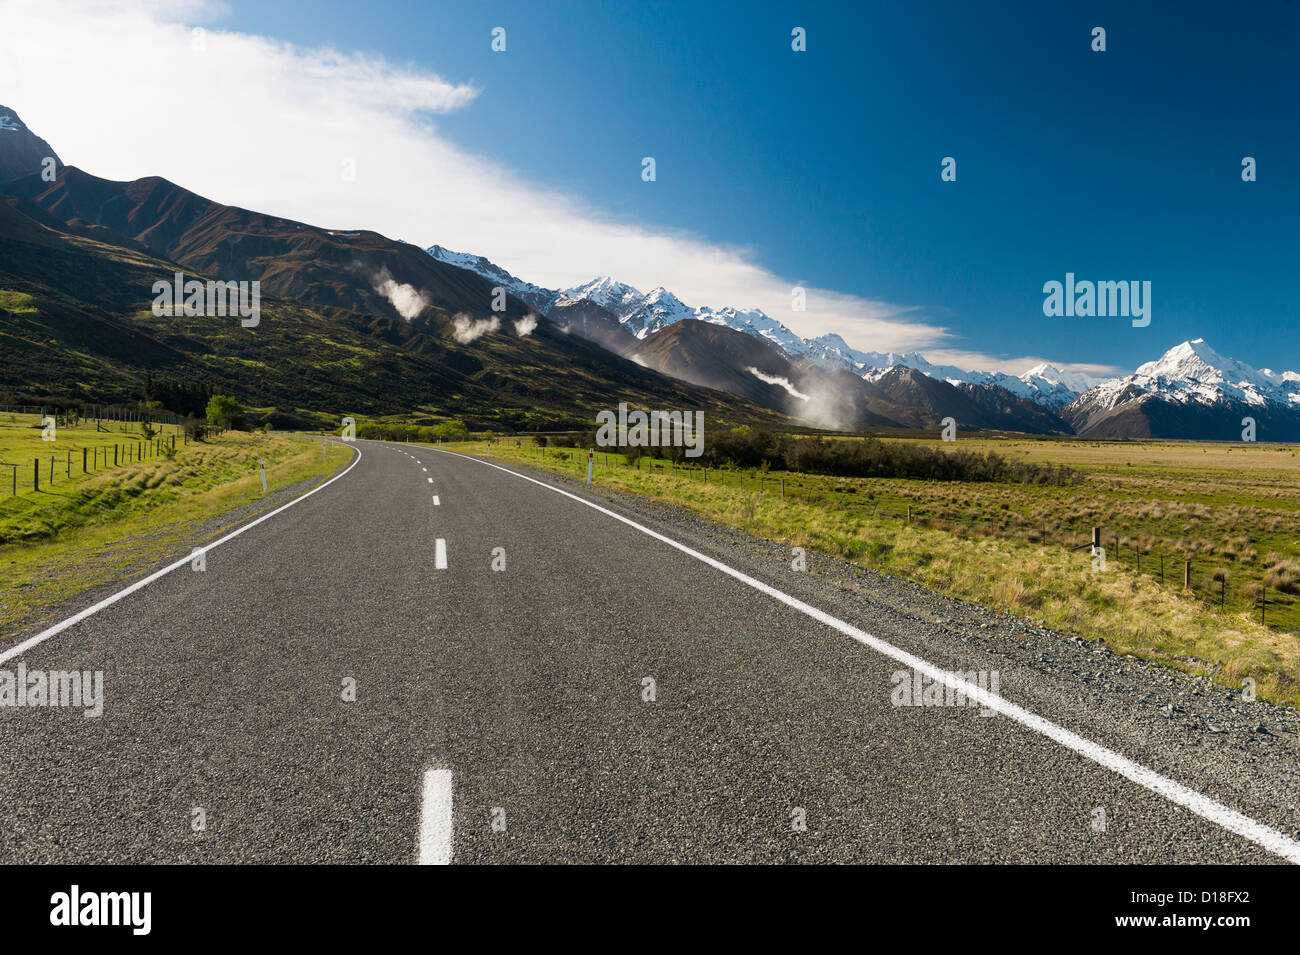 Paved road in rural landscape Stock Photo